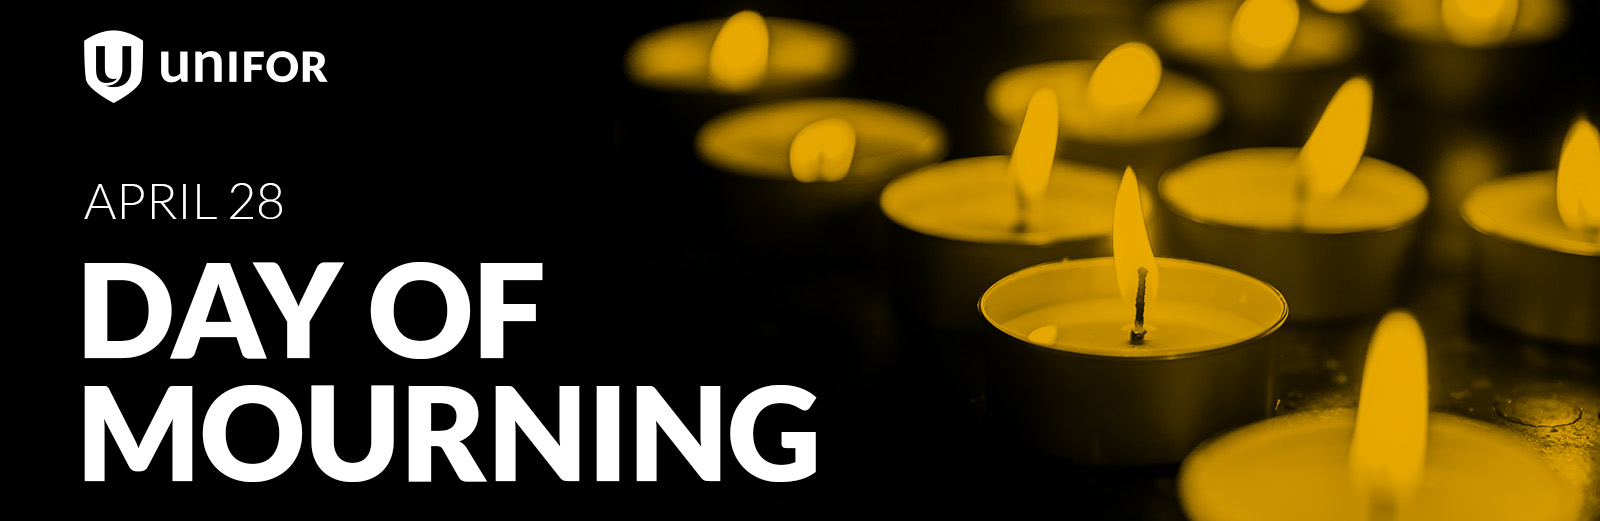 Unifor Logo April 28 Day of Mourning with candles burning